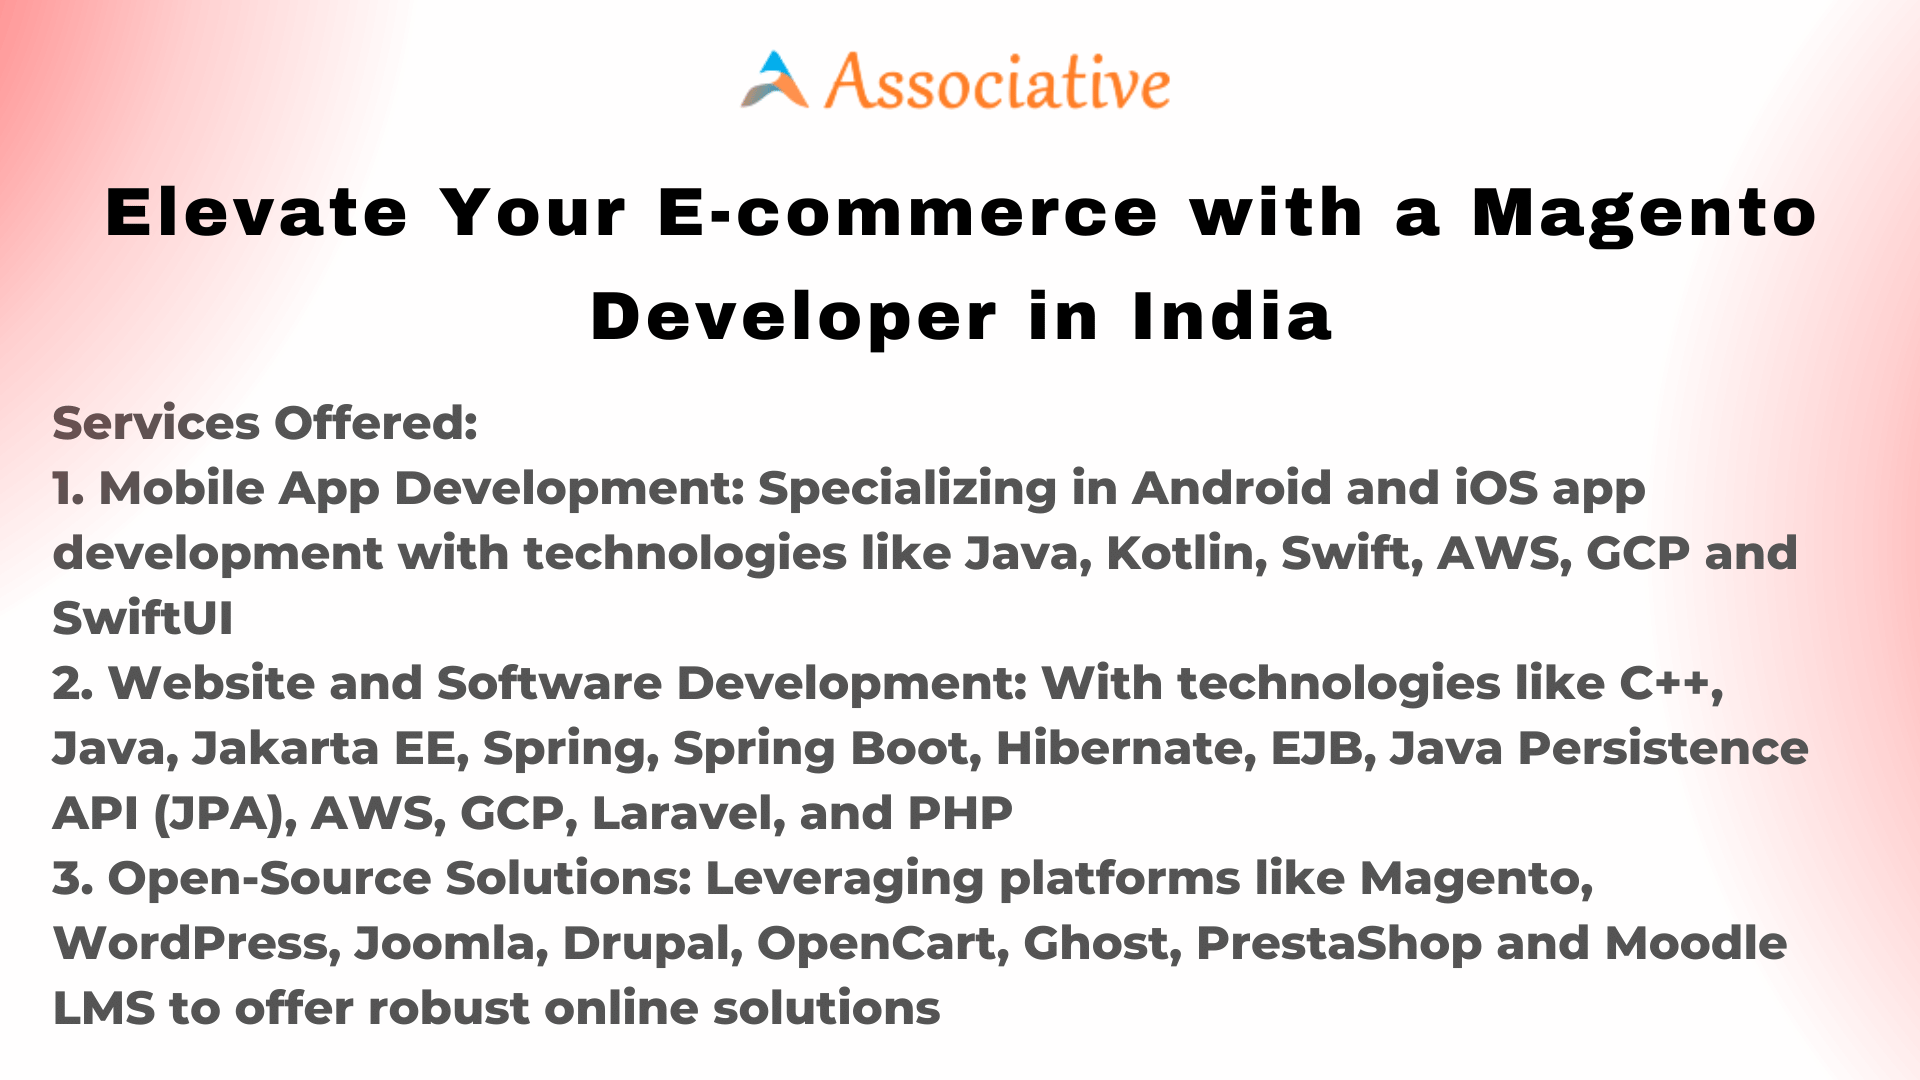 Elevate Your E-commerce with a Magento Developer in India